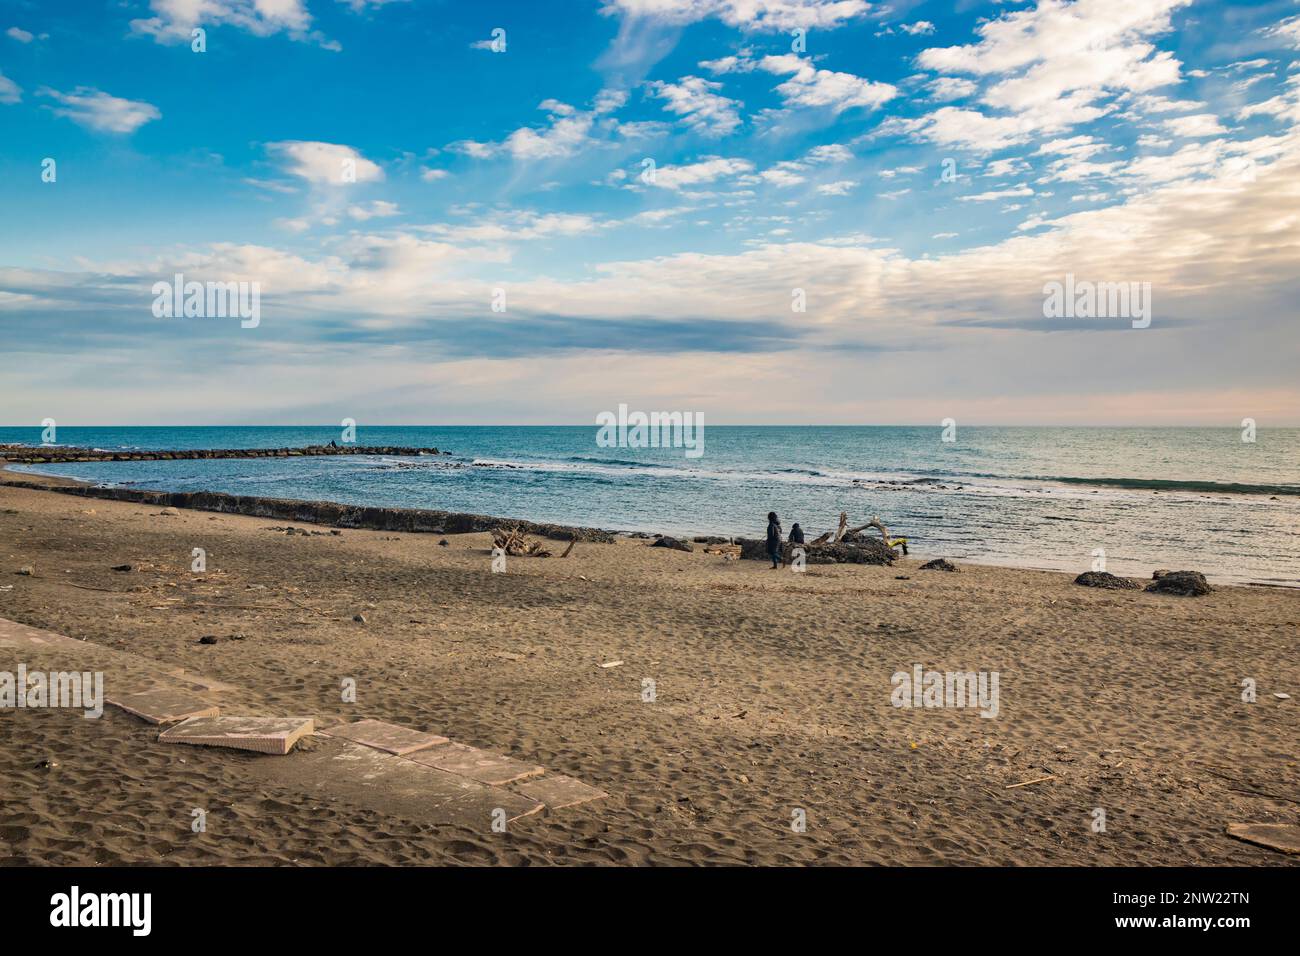 February 12, 2023 - Ostia, Rome, Italy. The sea of Ostia, on the Roman coast, on a winter Sunday. People enjoy the public holiday by walking on the be Stock Photo